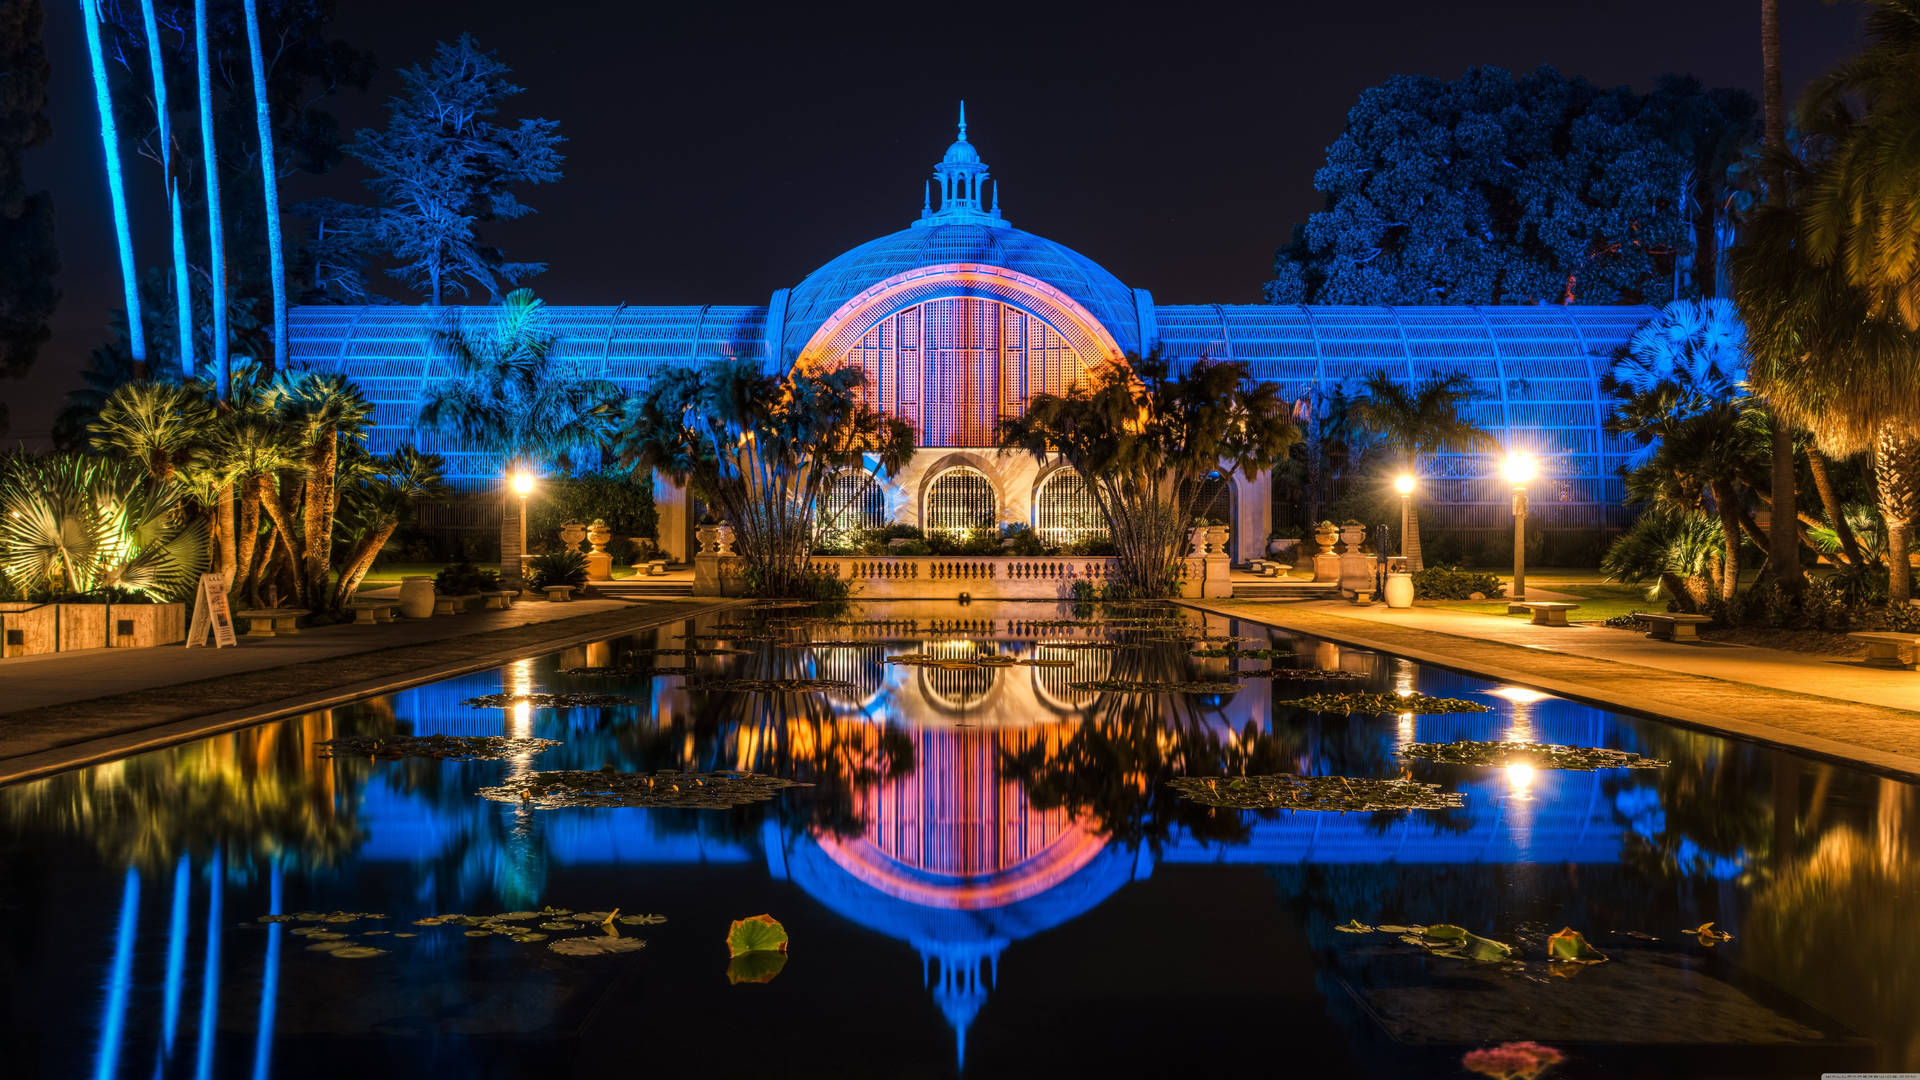 Enjoy An Afternoon Visiting The Picturesque Balboa Park In San Diego Background